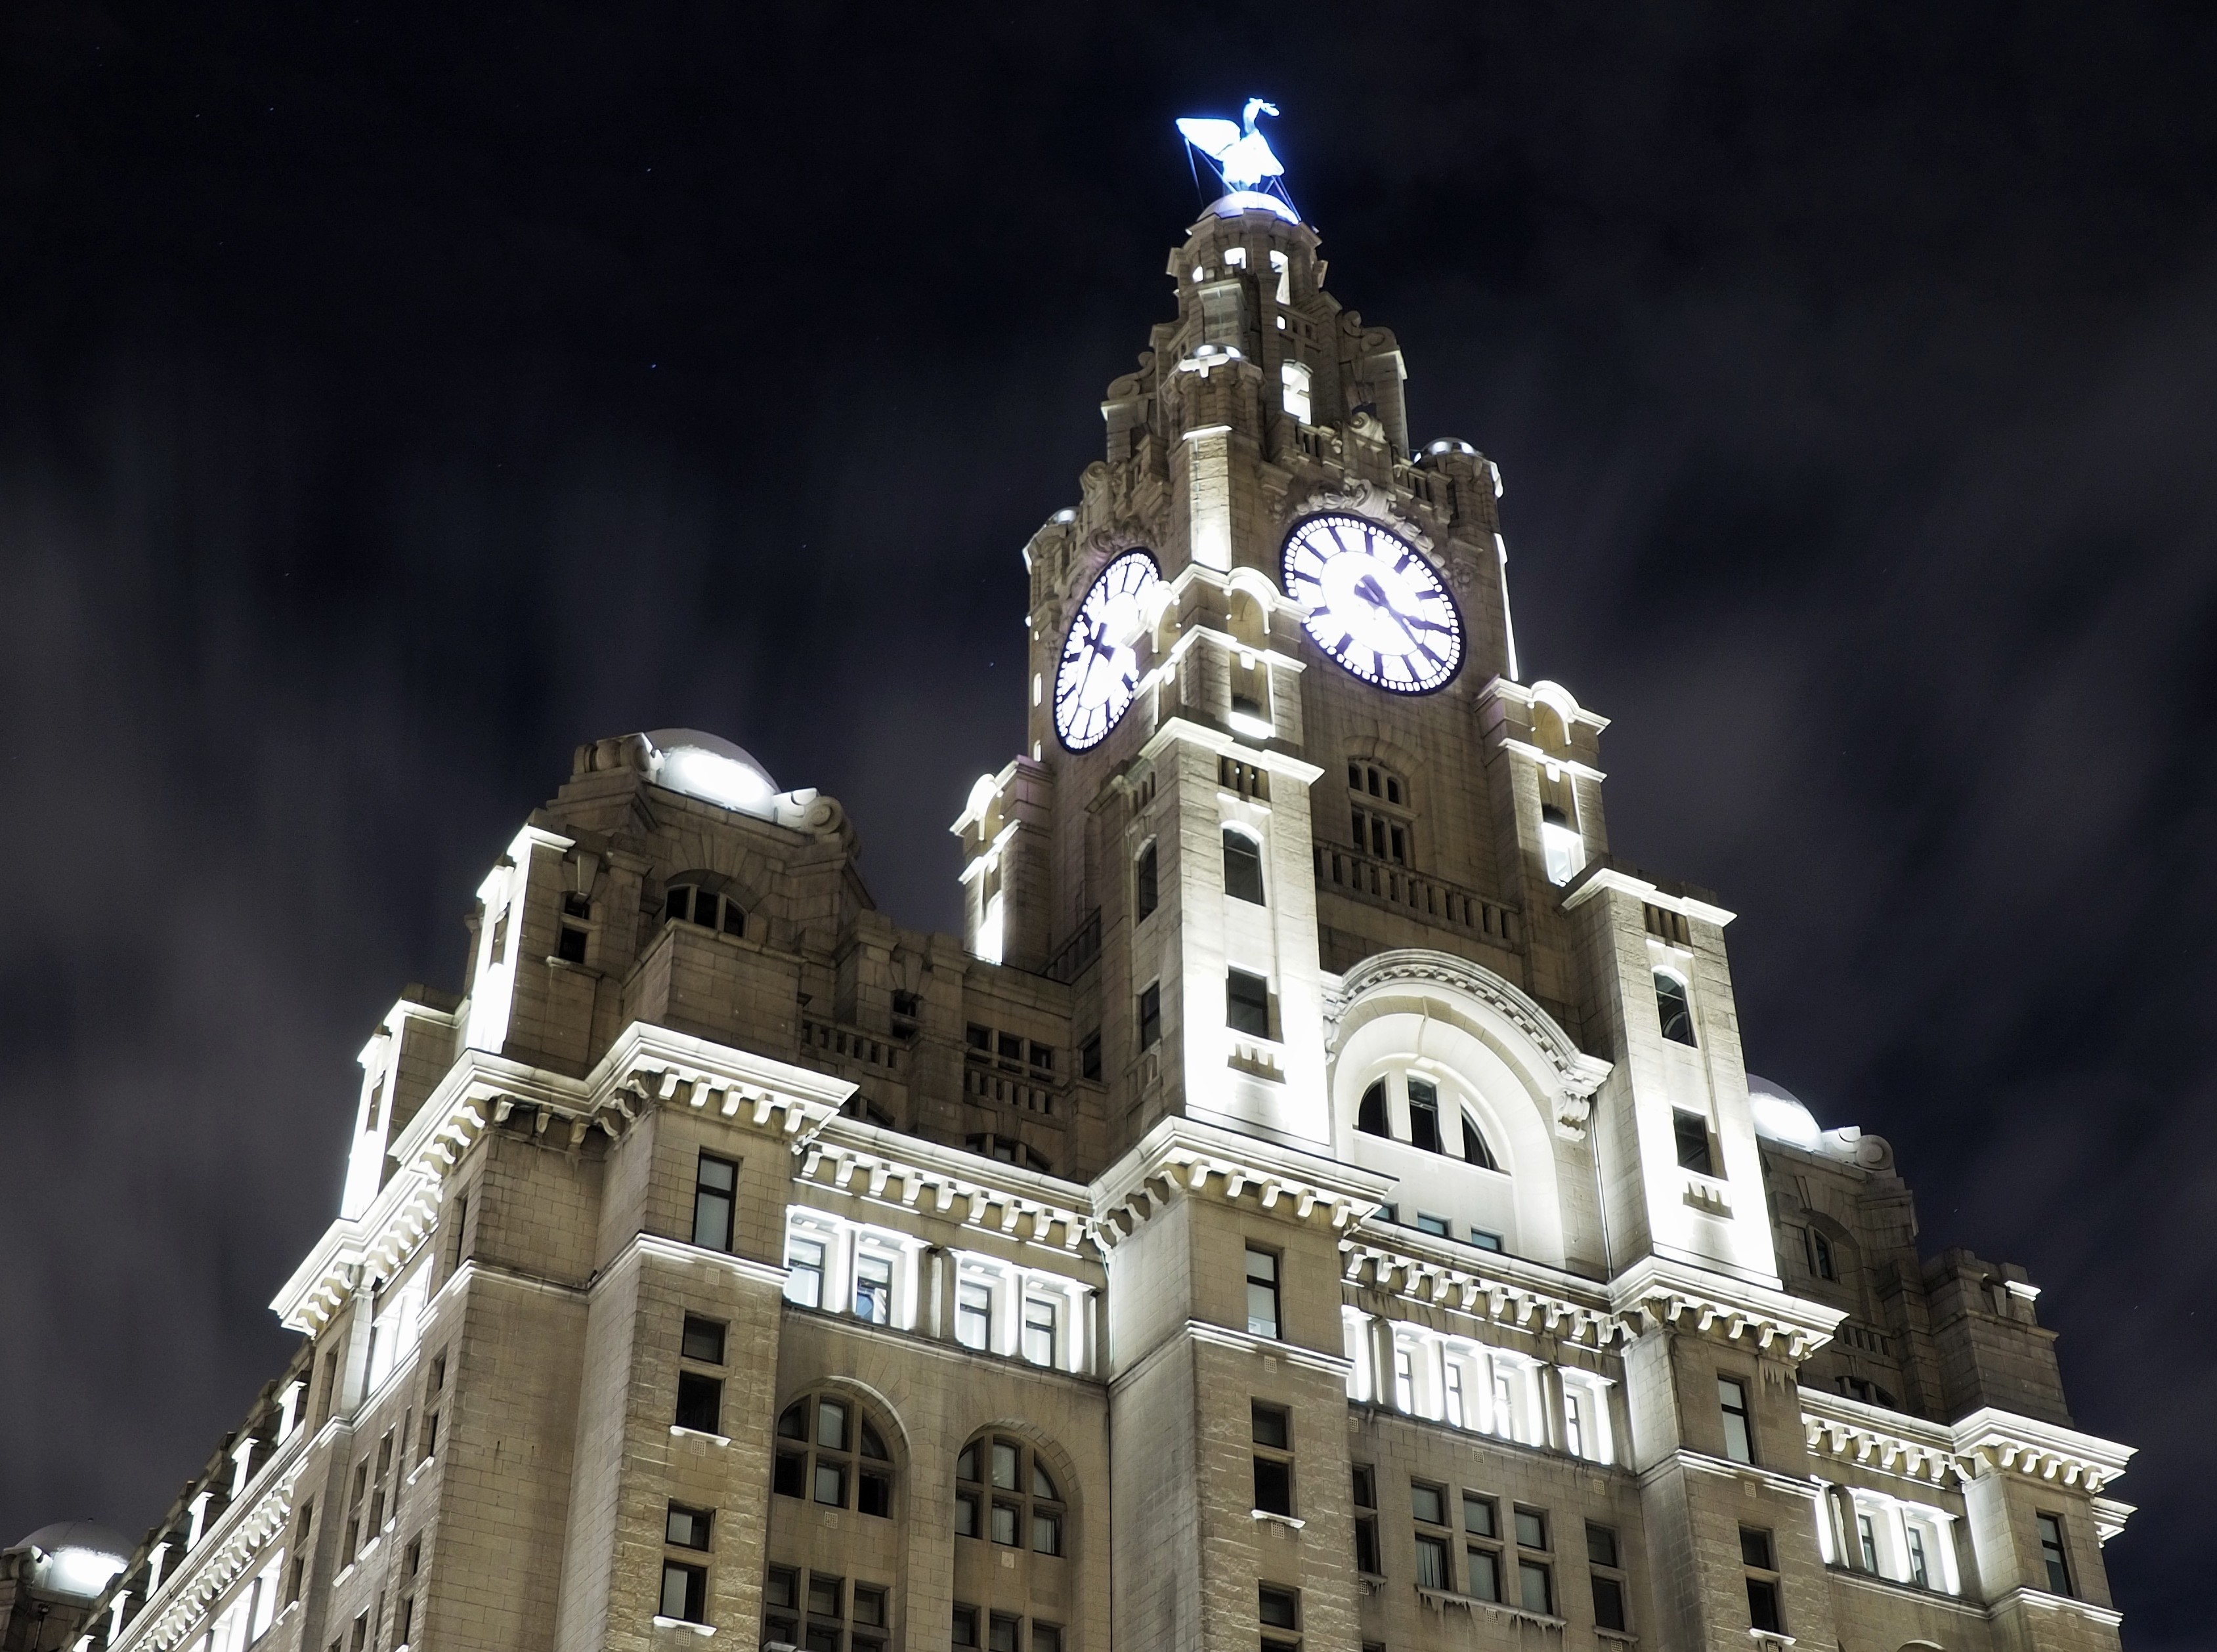 The Royal Liver Building to pay respects to fallen heroes with commemorative light display @RLB360